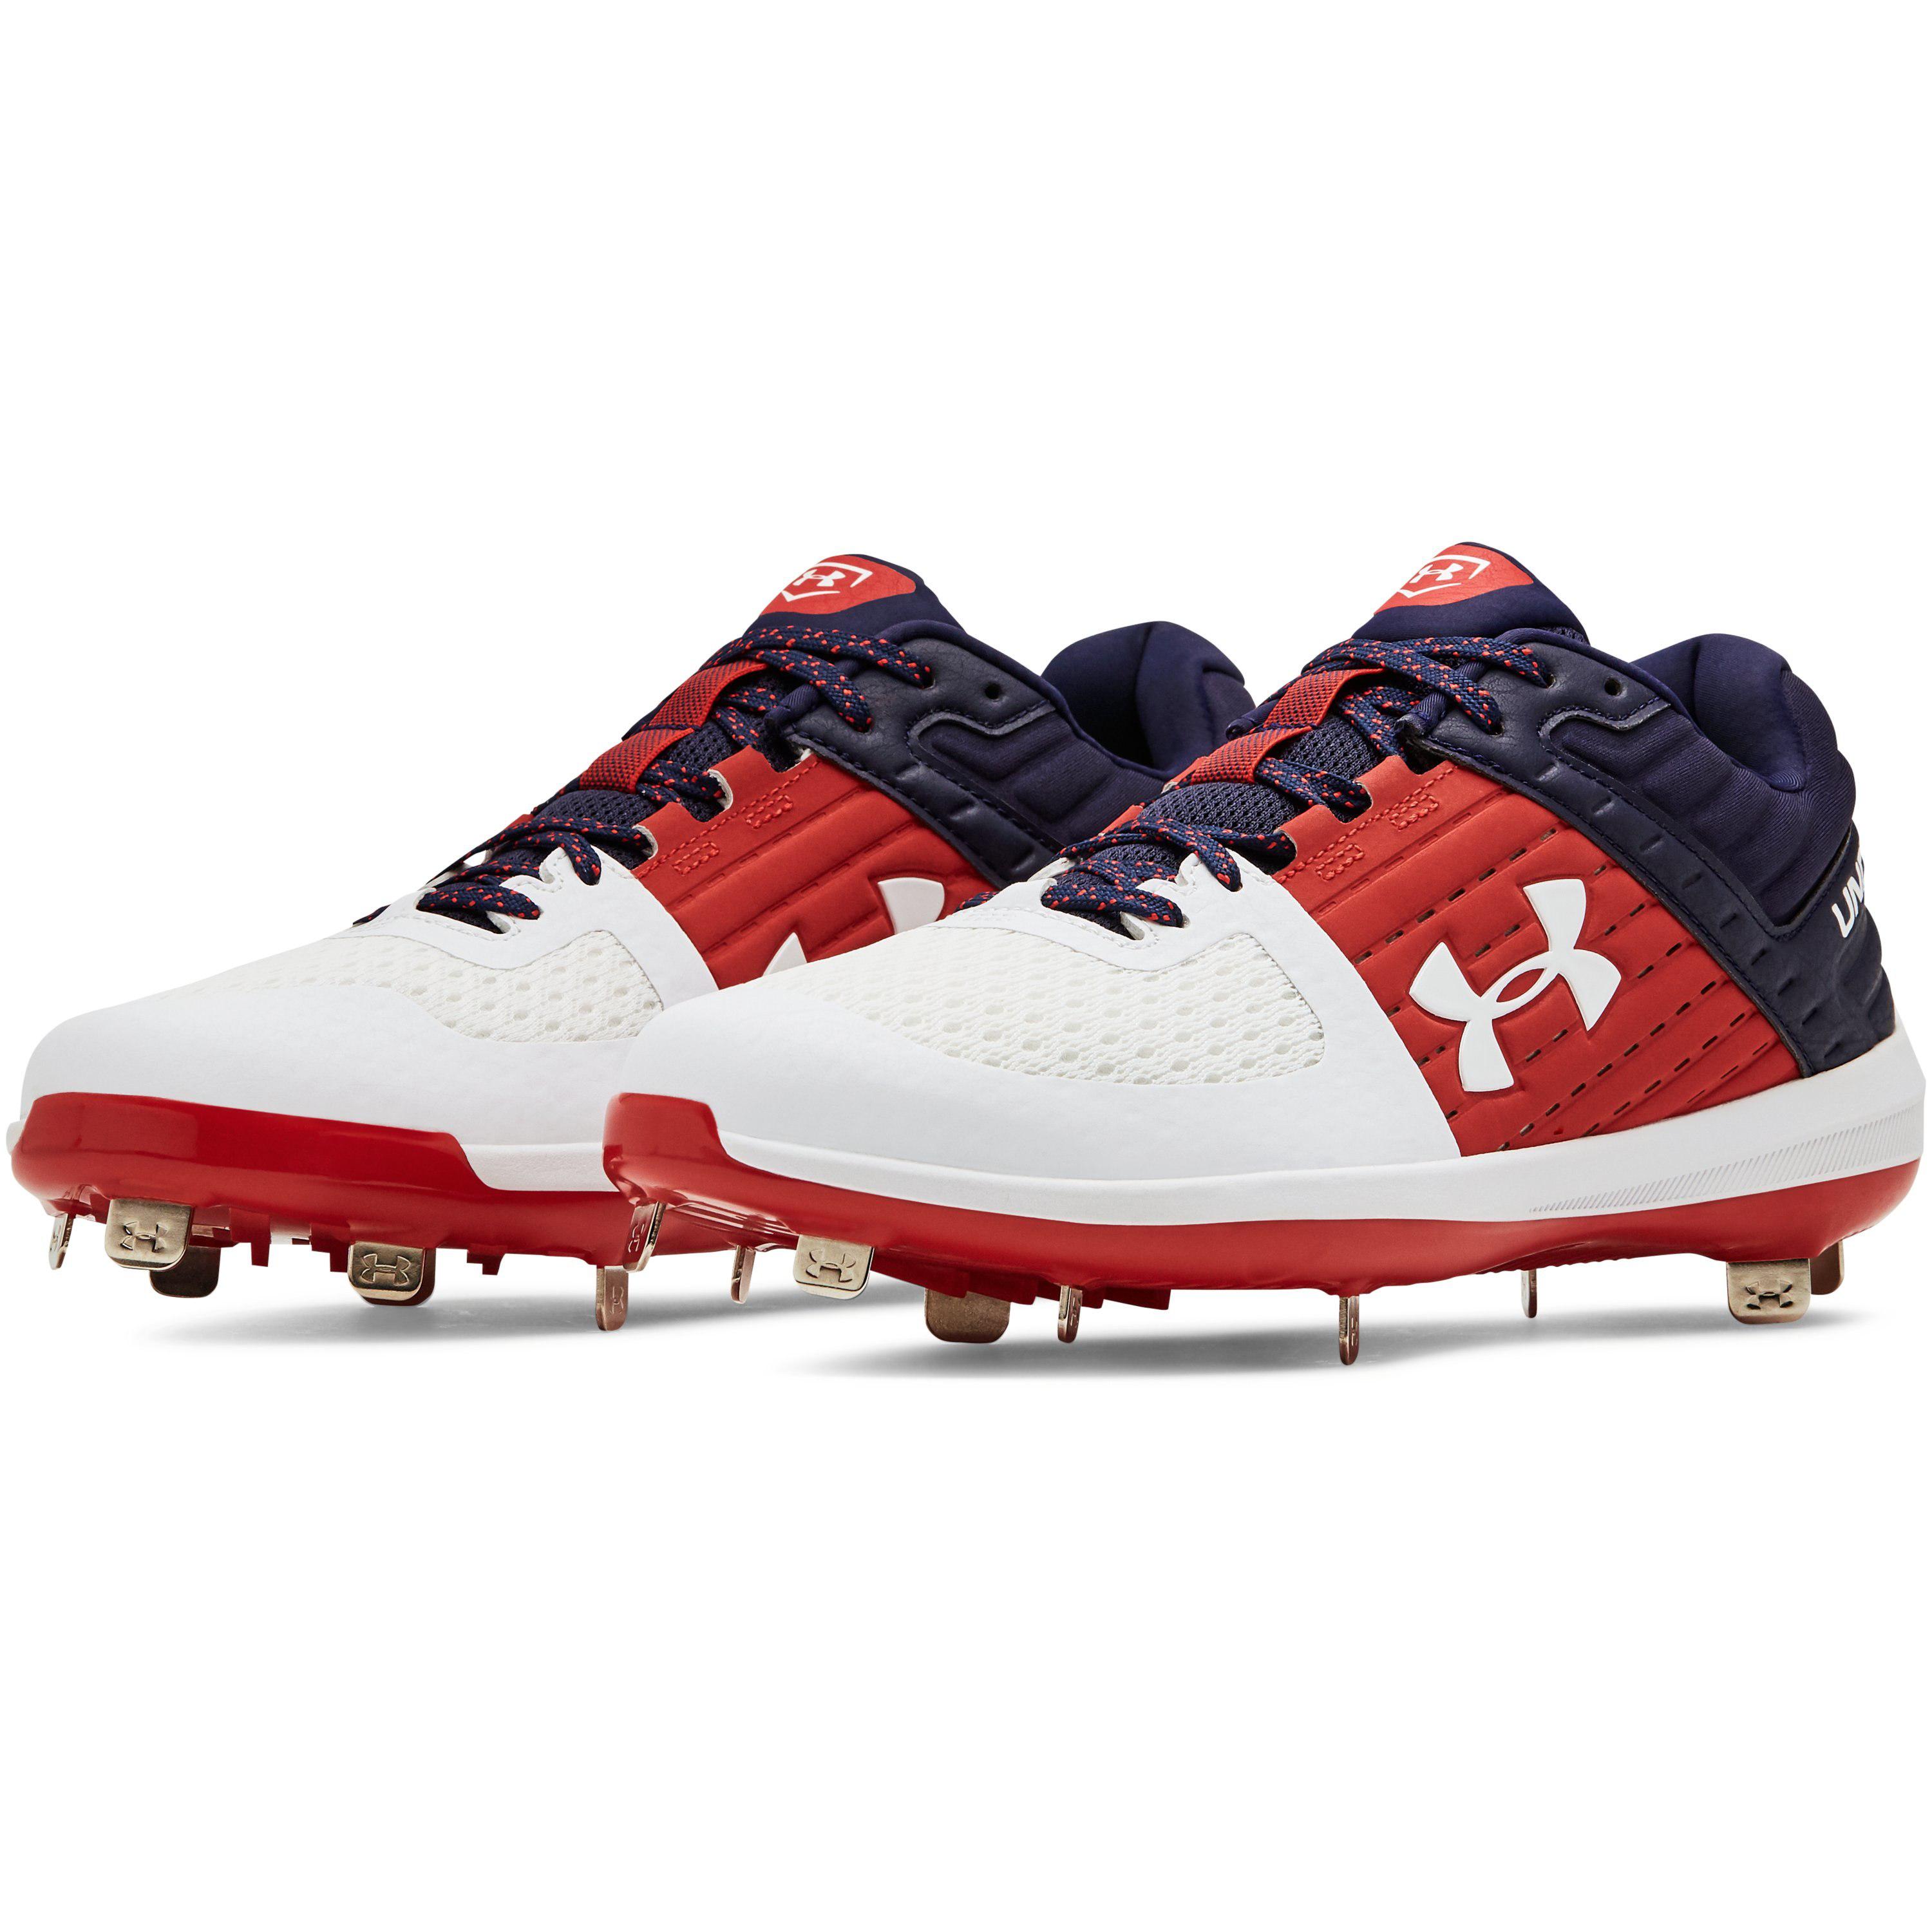 Under Armour Men's Ua Yard Low St Baseball Cleats in Navy/Red (Red 